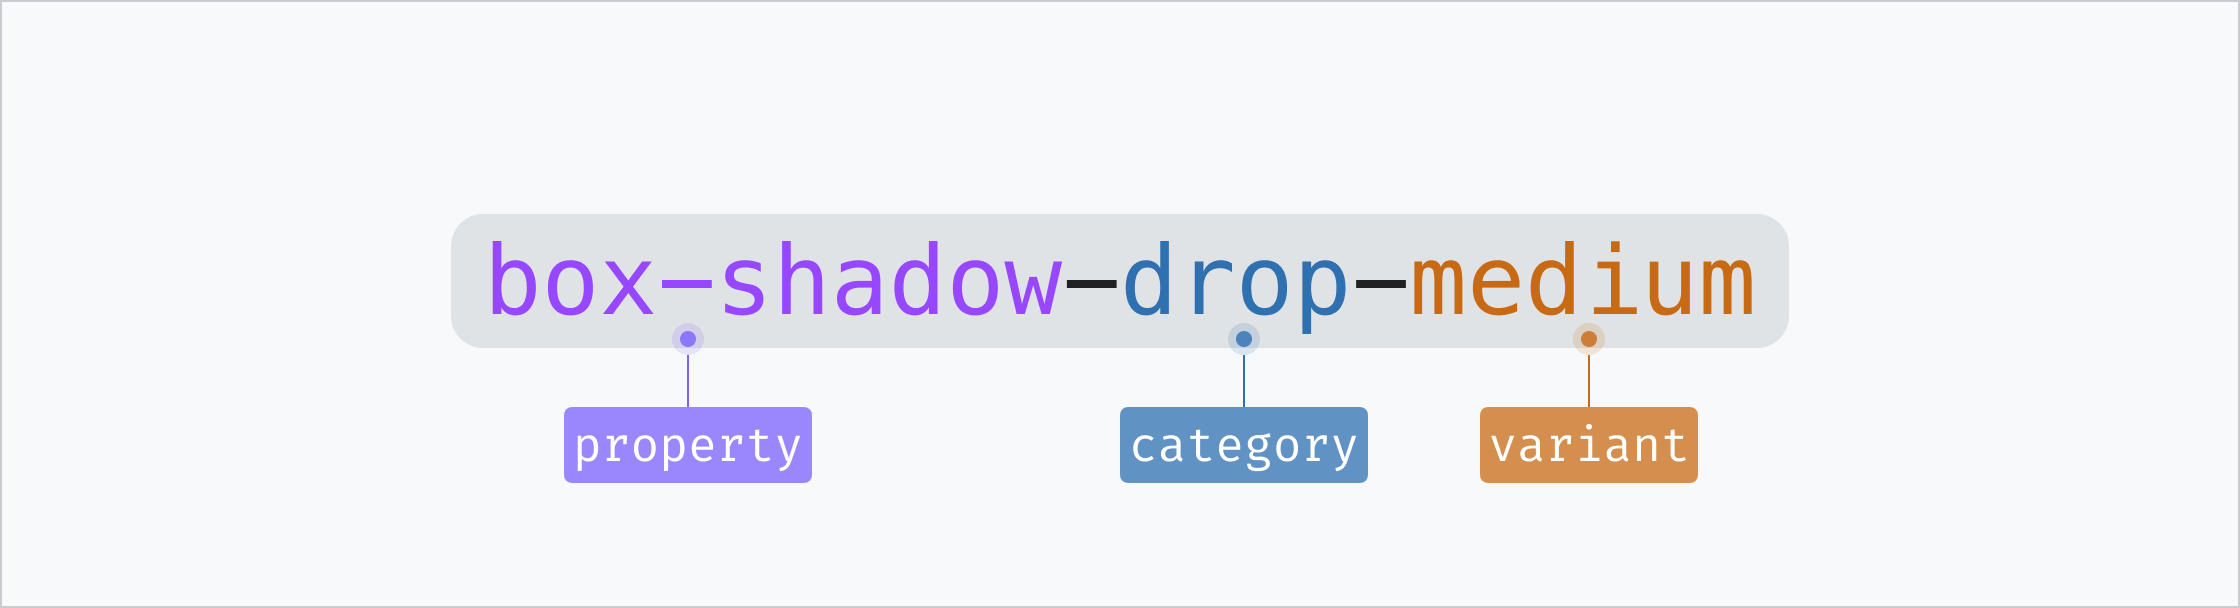 decision token naming scheme: property, category and variant